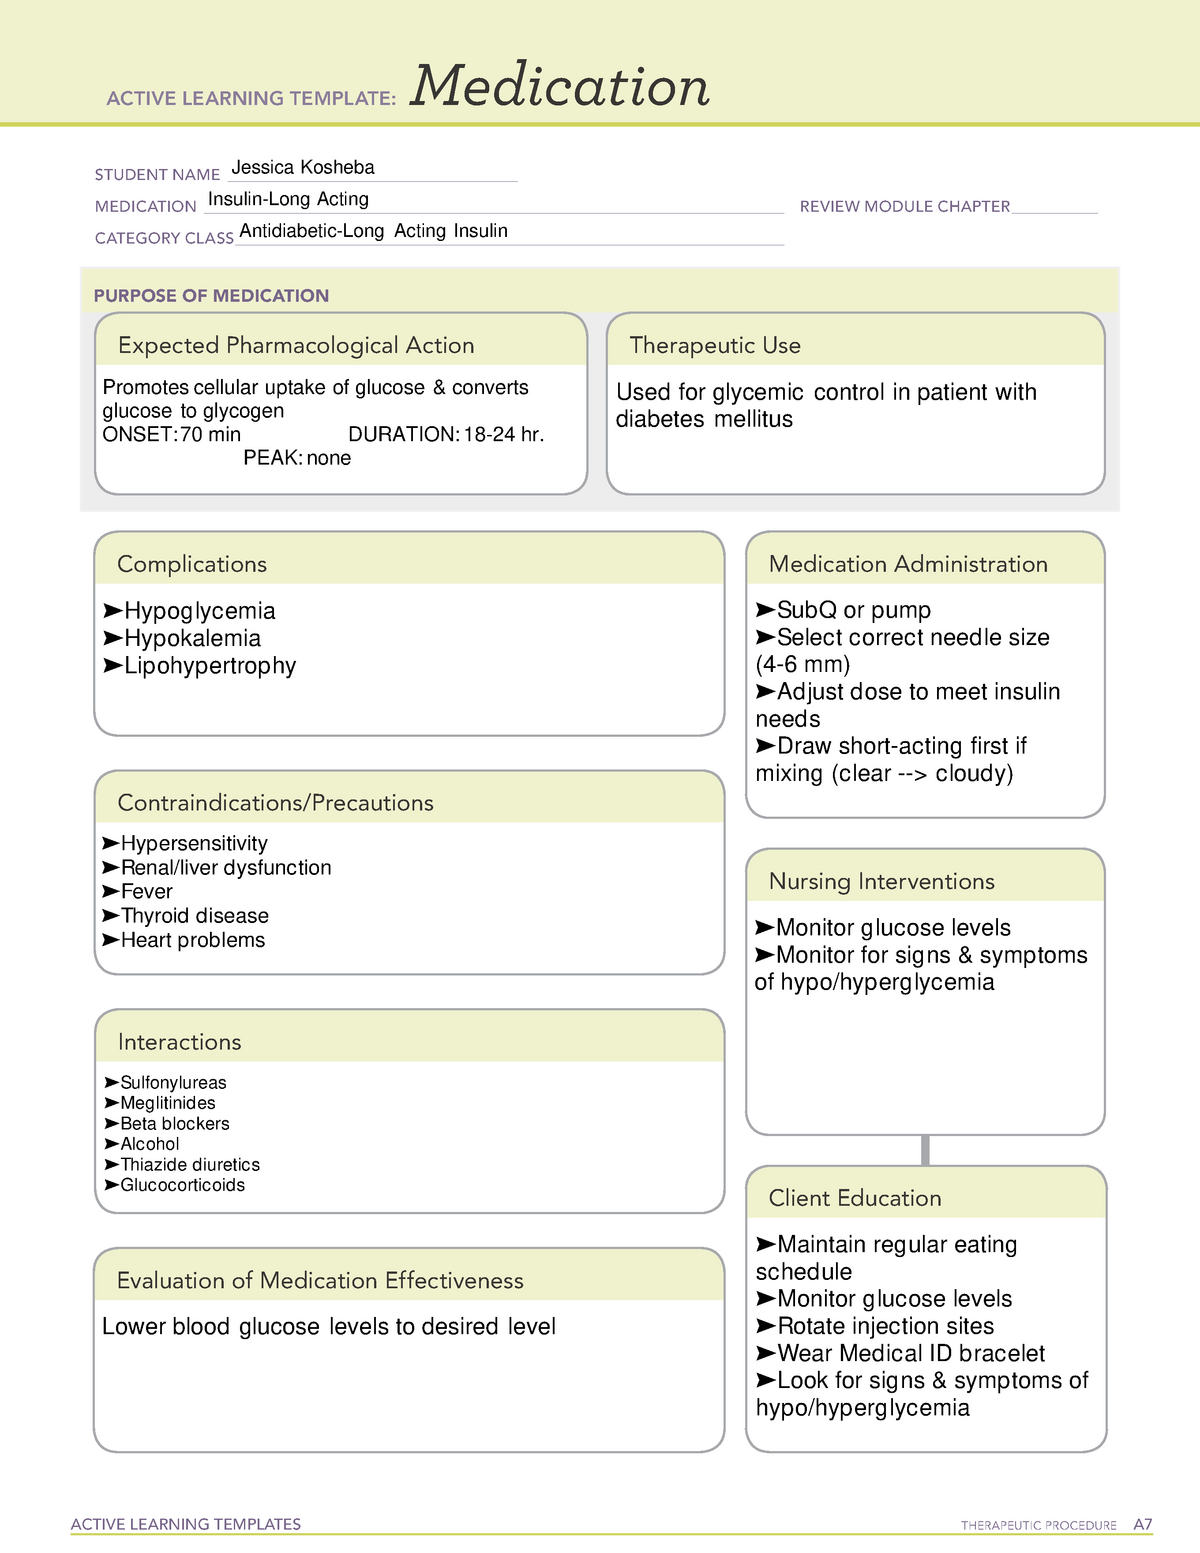 ati-medication-on-long-acting-insulin-active-learning-templates